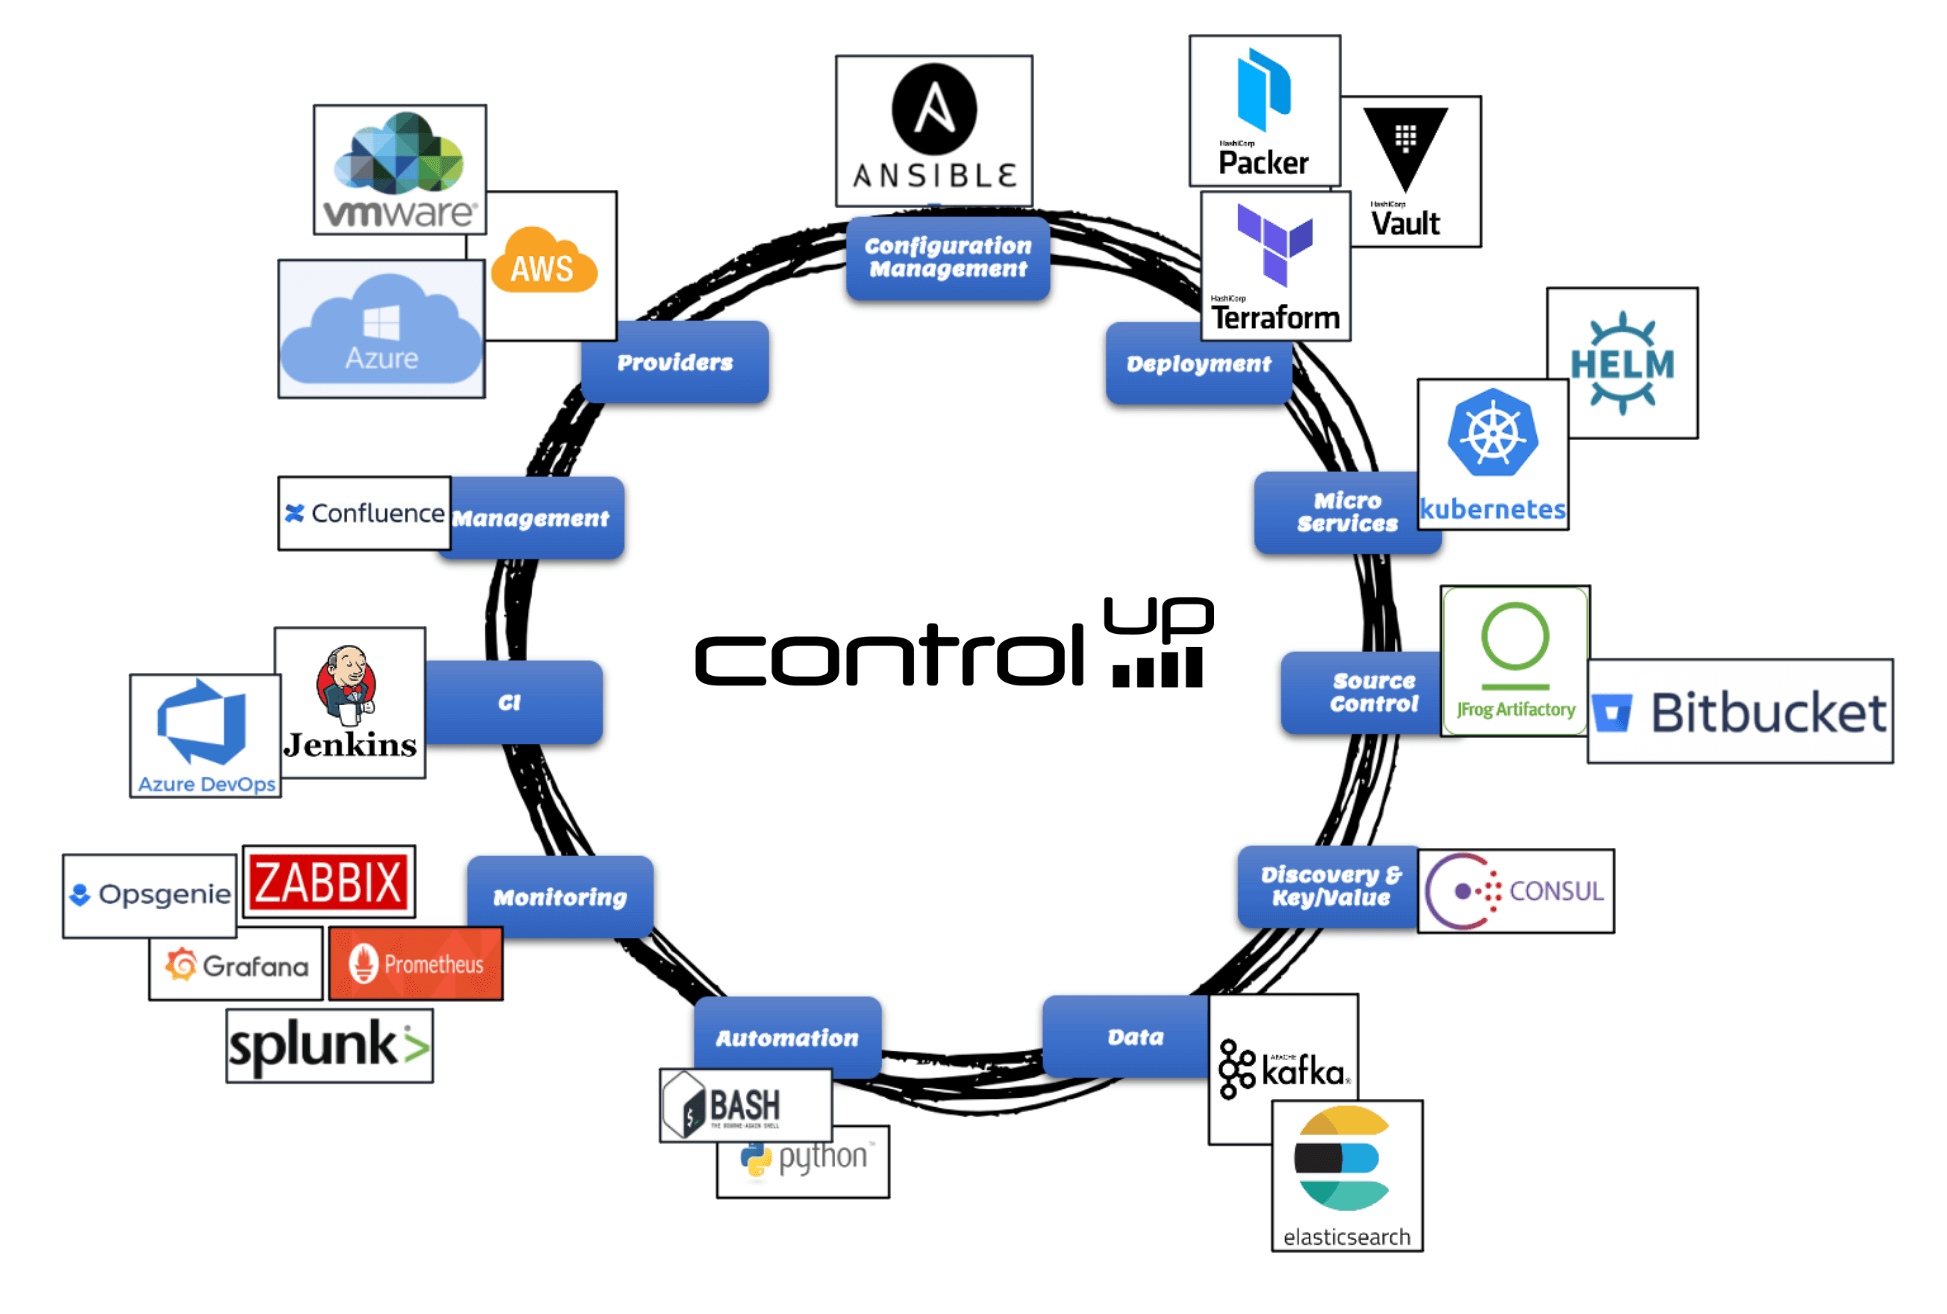 DevOps tools and components at ControlUp